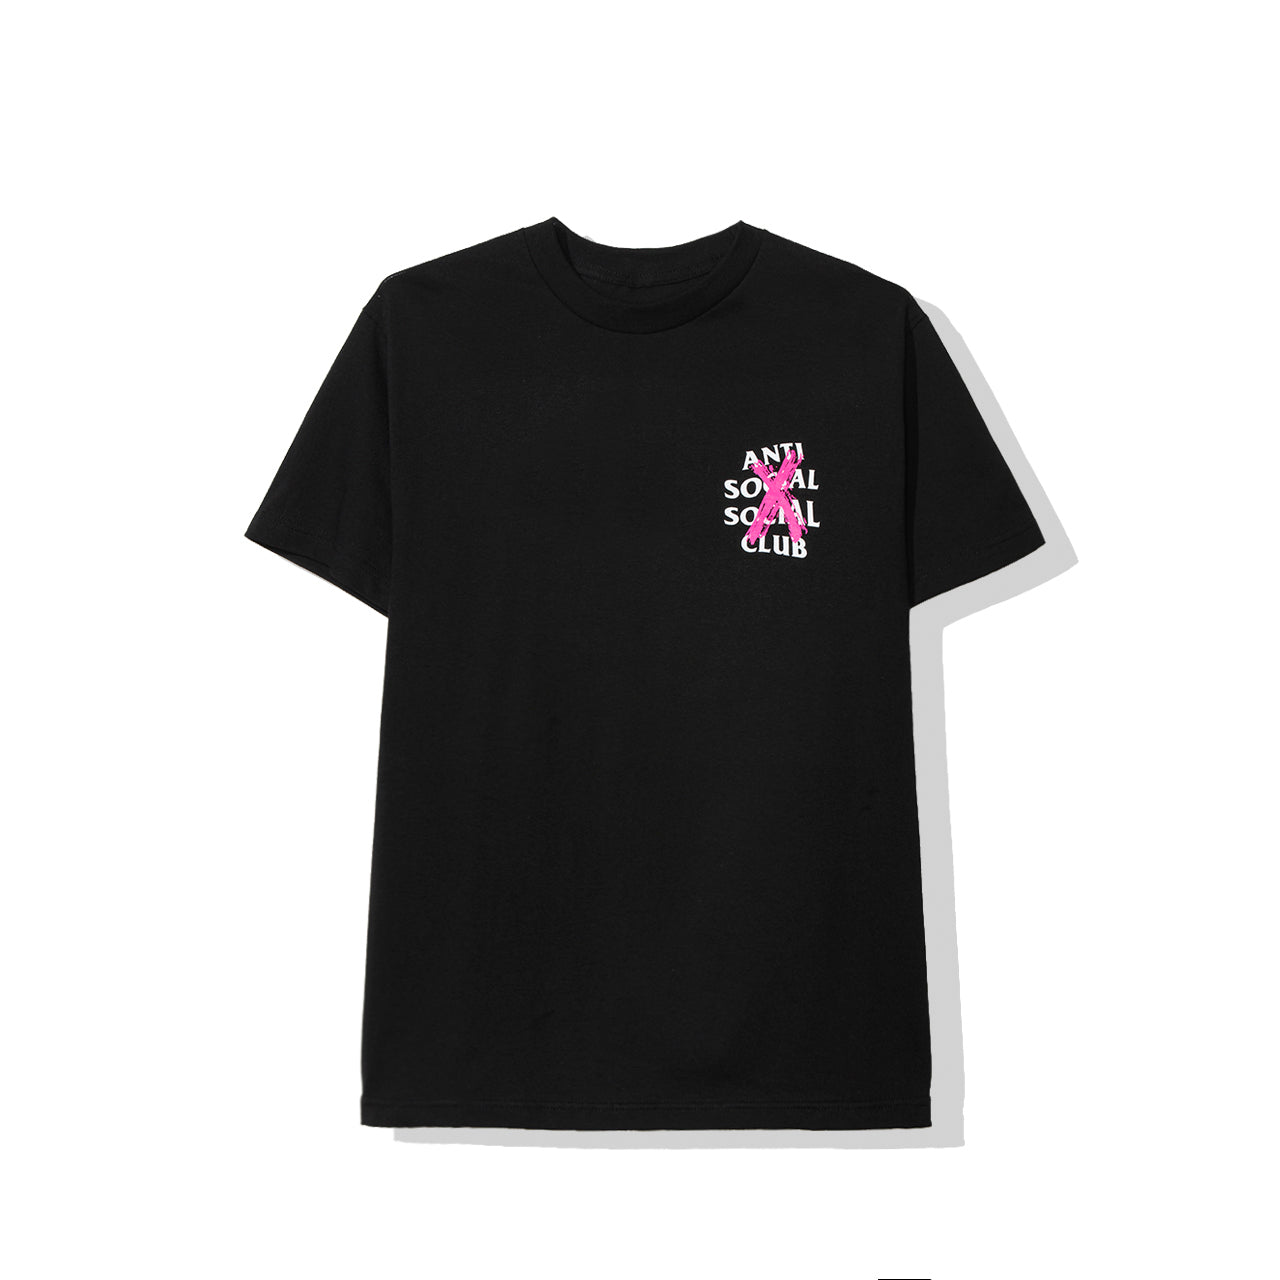 Cancelled Black Tee